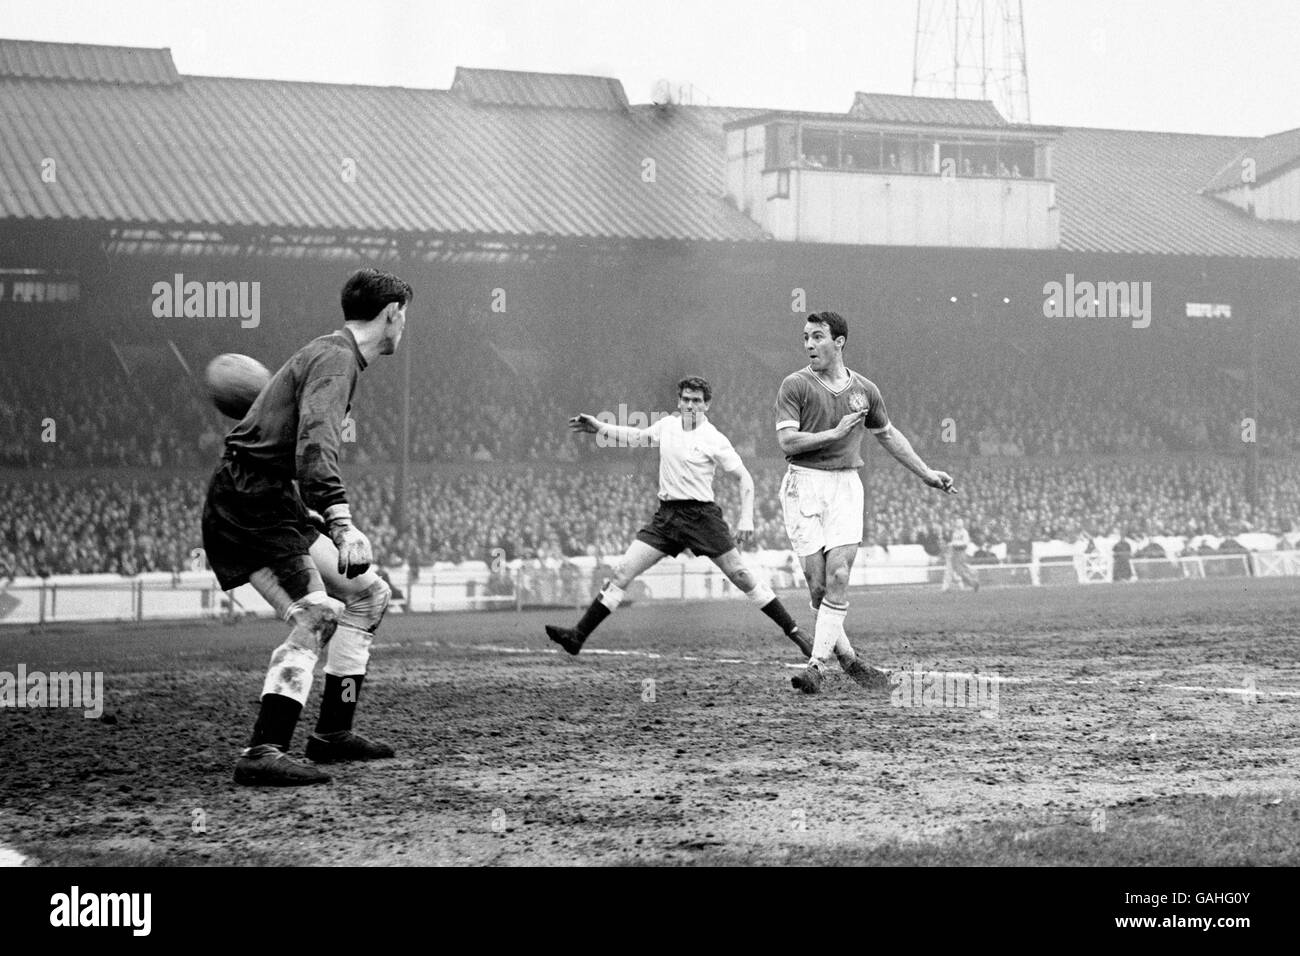 Soccer - Football League Division One - Chelsea v Tottenham Hotspur. Chelsea's Jimmy Greaves (r) flips the ball into the empty net, watched by Tottenham Hotspur's Ron Henry (c) and goalkeeper Bill Brown (l) Stock Photo